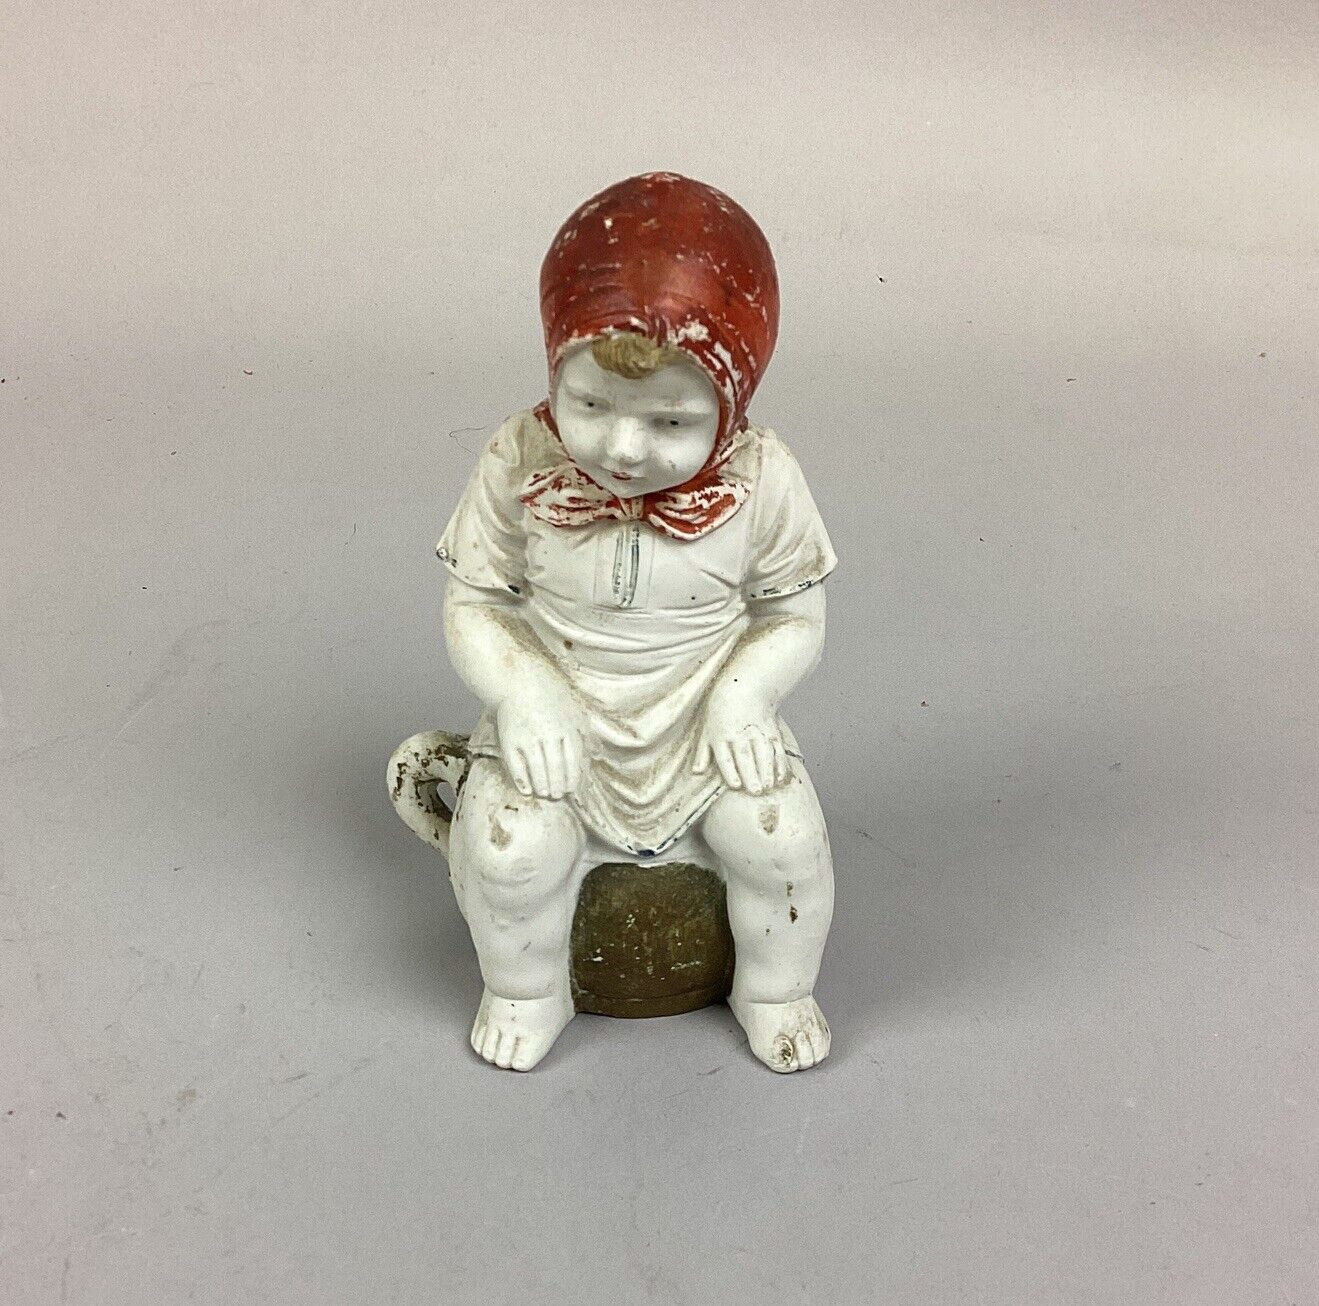 Antique Bisque Figurine of Young Child Sitting on Chamber Pot - 5.5”